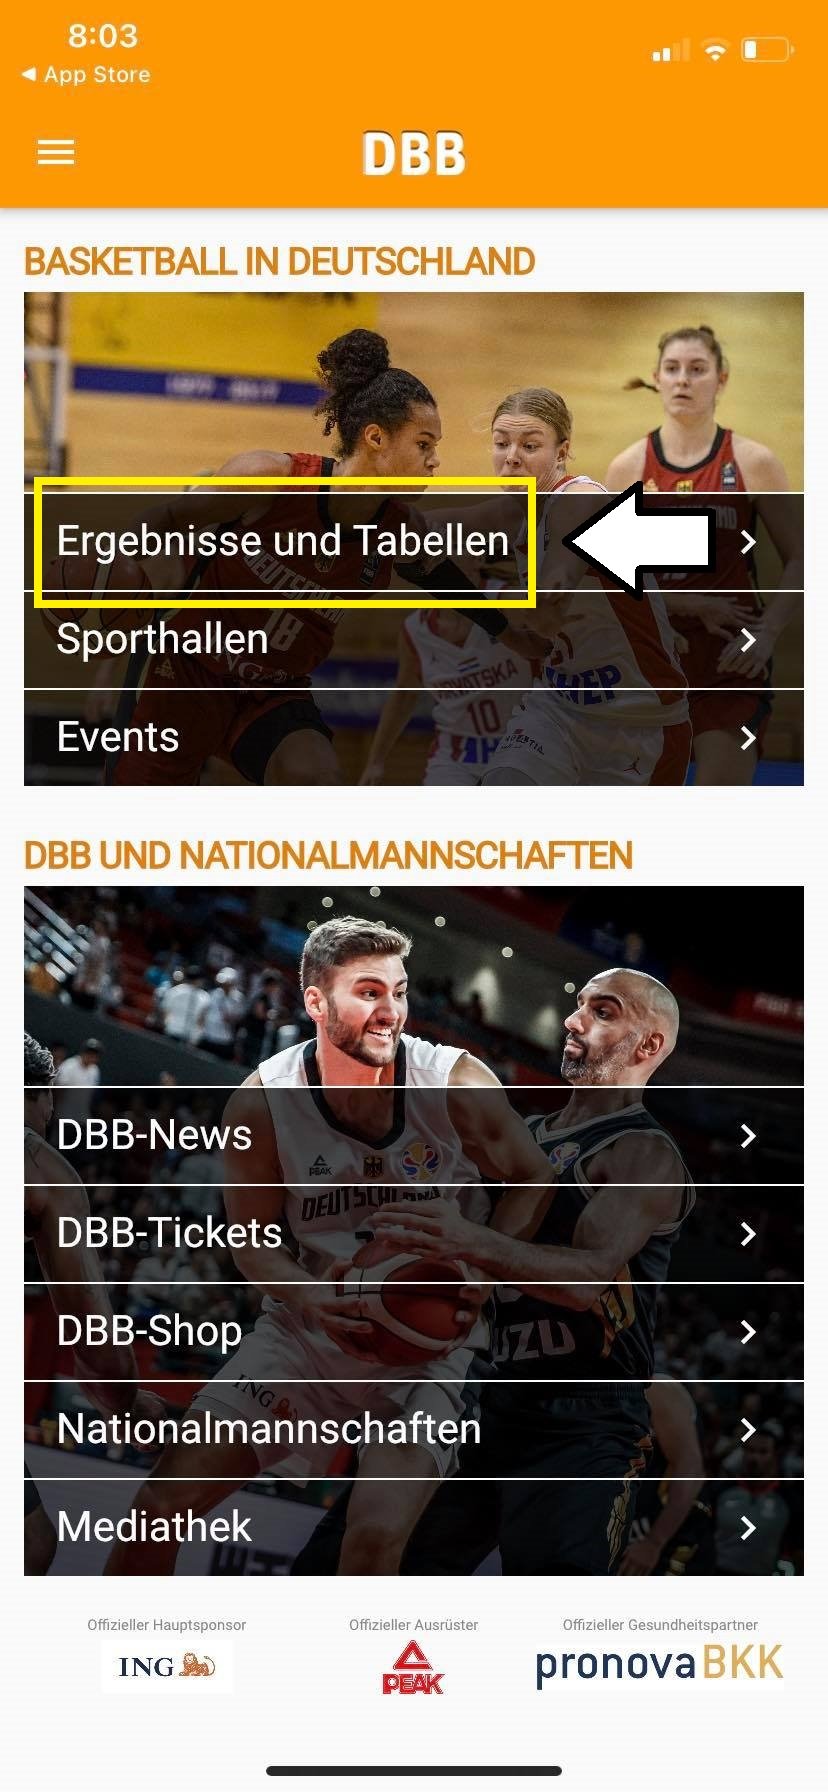 Contacting German Overseas Basketball Teams should be done by region.